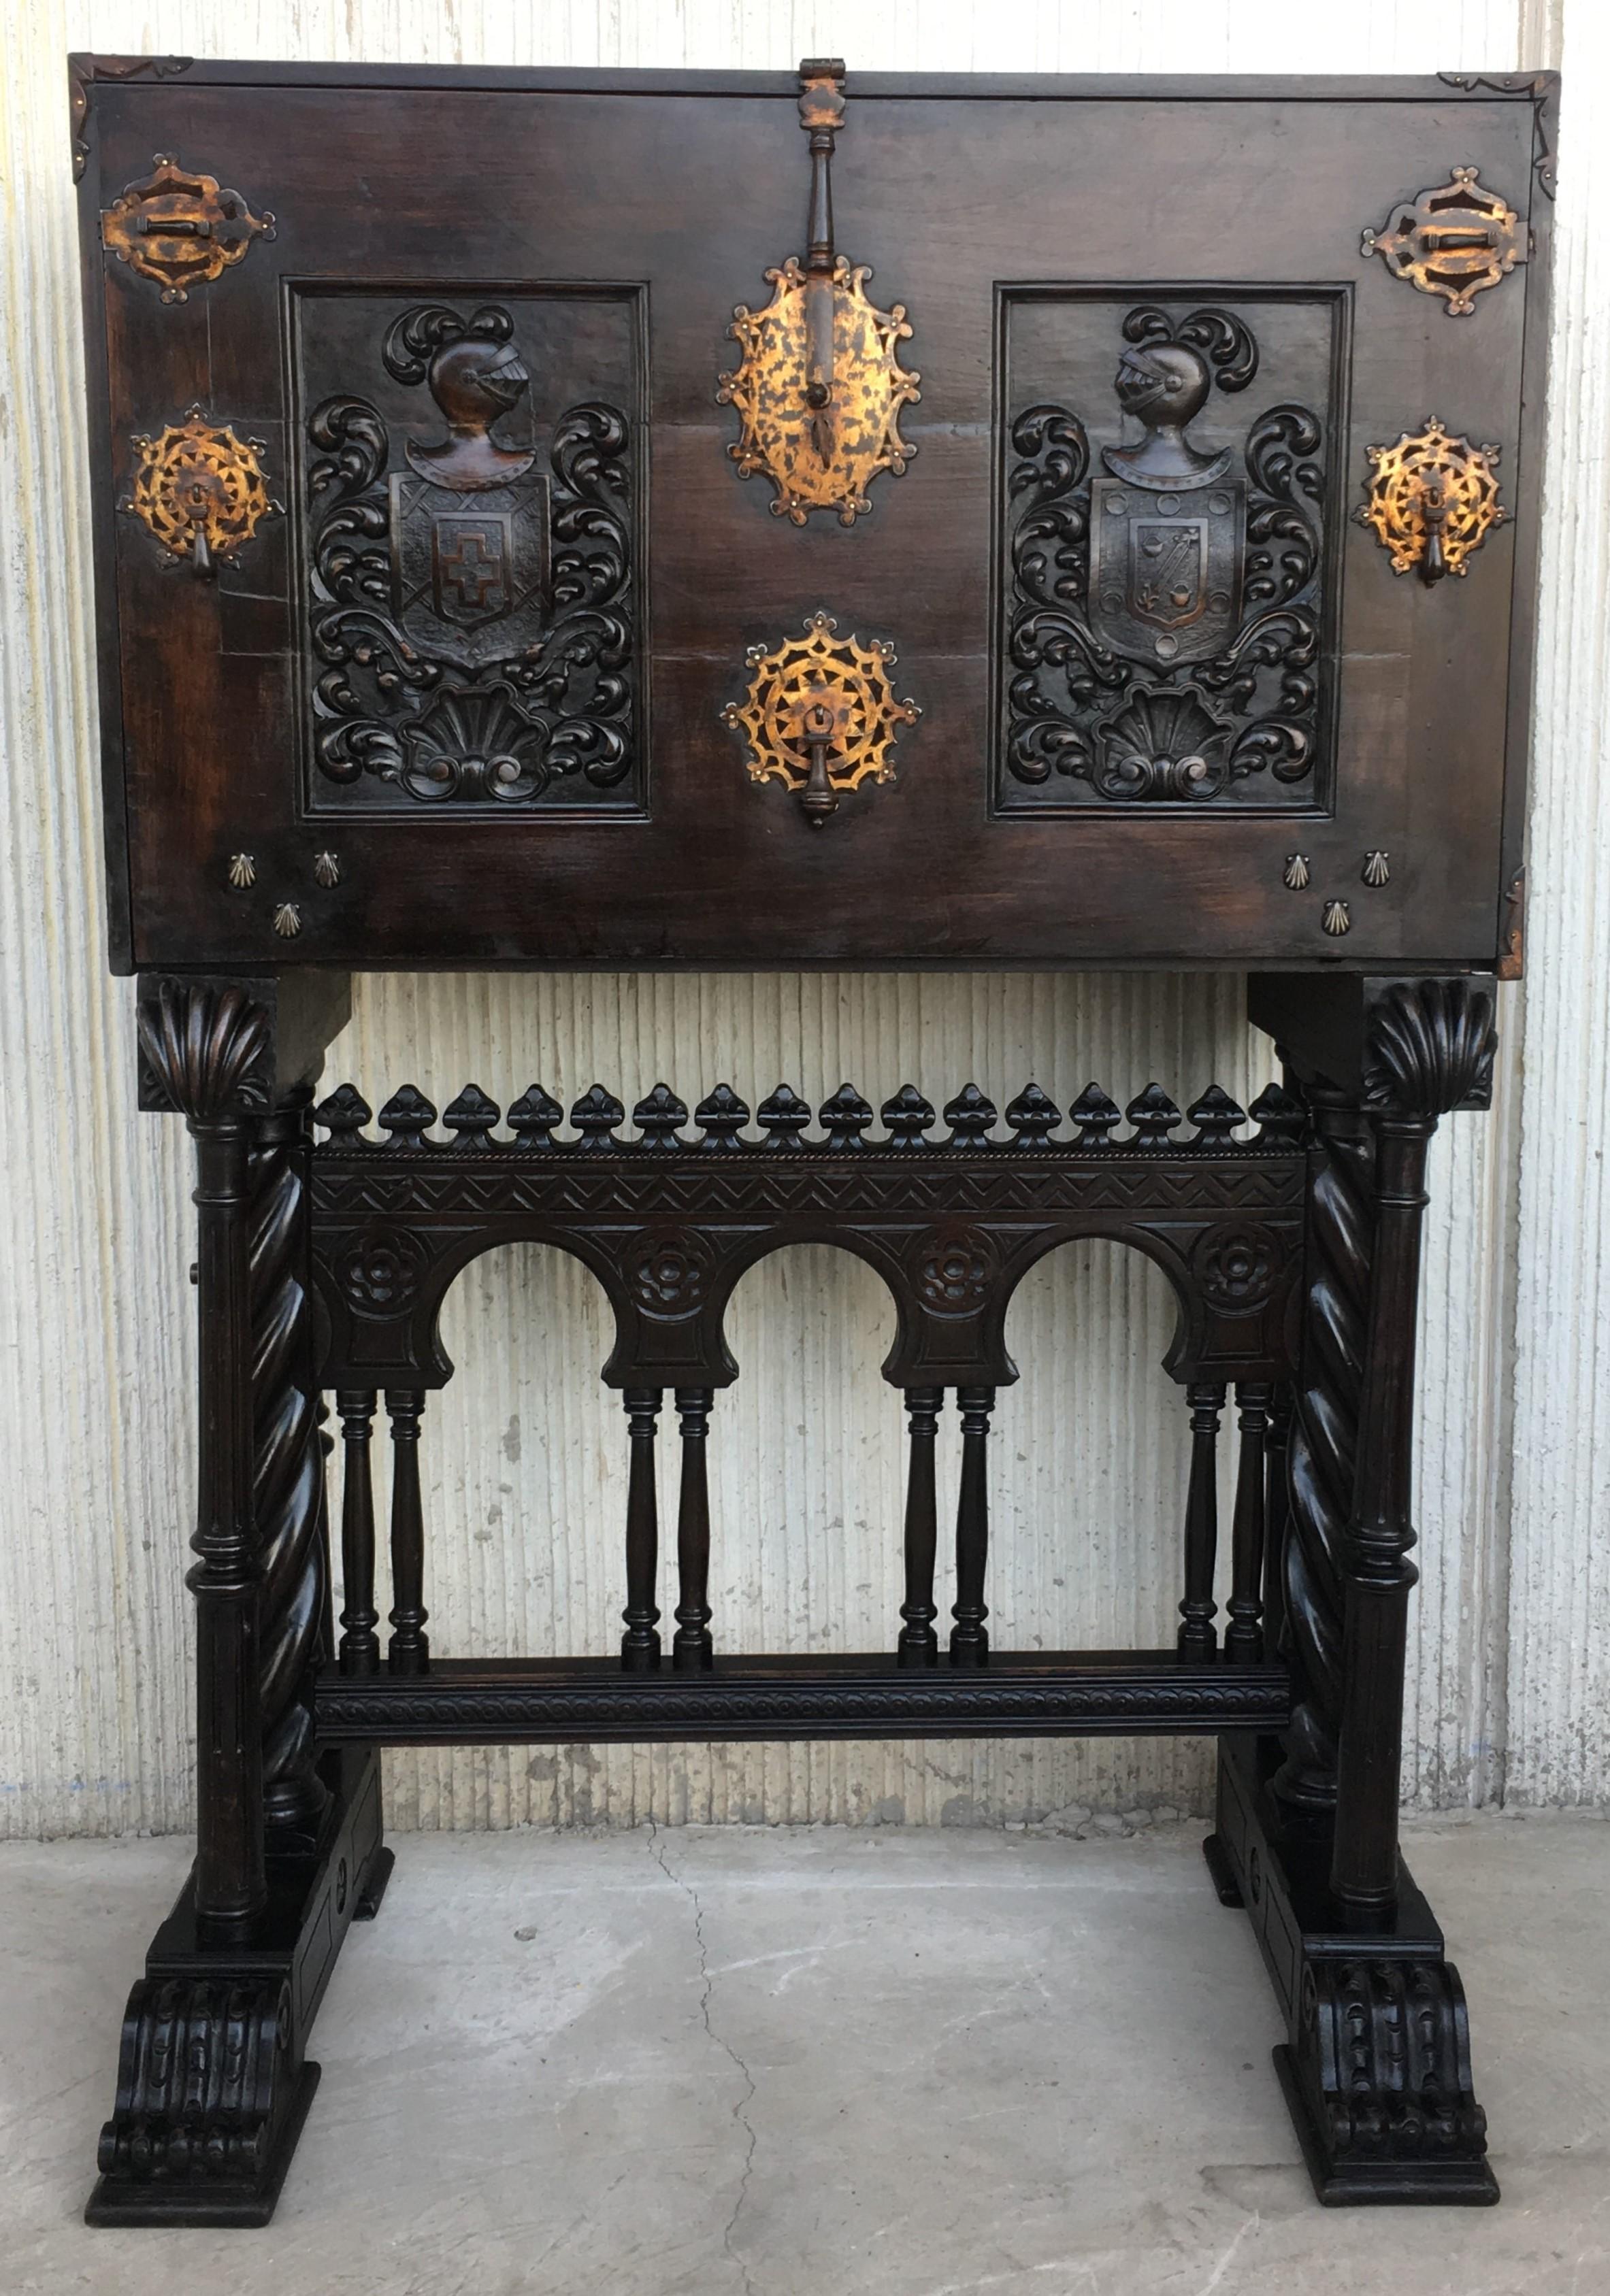 This exquisite Baroque style cabinet is made of walnut veneer on a solid oakwood core.
The cabinet it´s a luxury cabinet which was in the ownership of high-ranking merchant families.
Barguen~o of Salamanca model, also called columns, with hinged